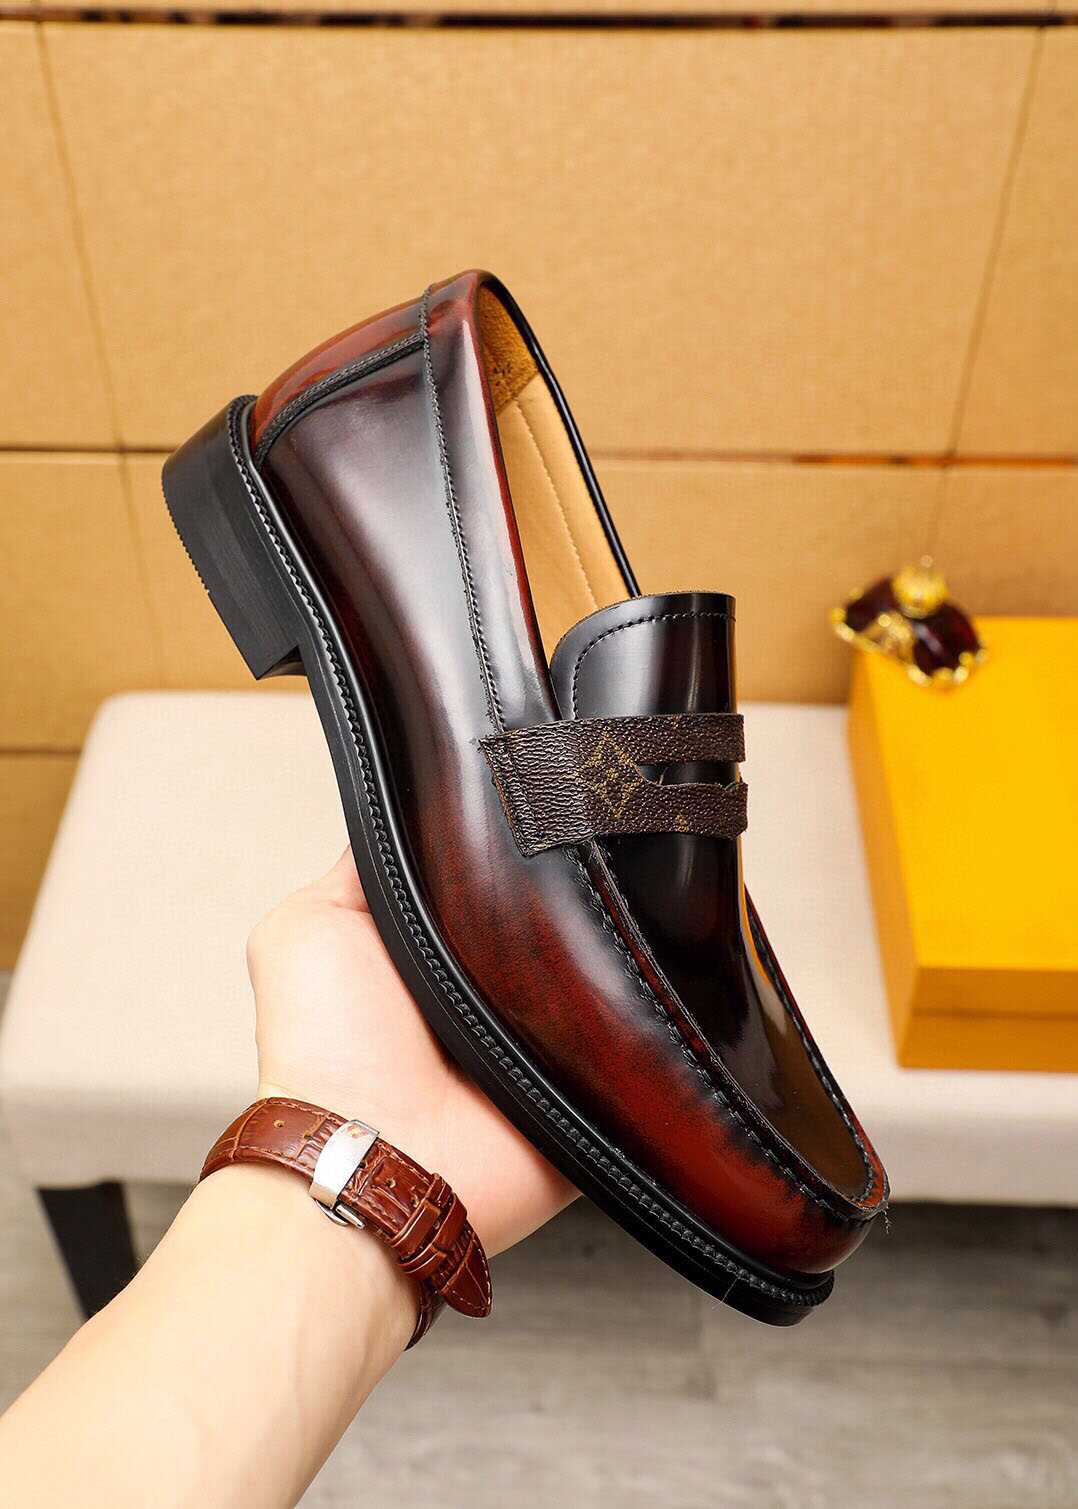 2023 Mens Dress Shoes Fashion Genuine Leather Loafers Brand Designer Casual Slip On Flats Men Office Formal Party Wedding Oxfords Size 38-45